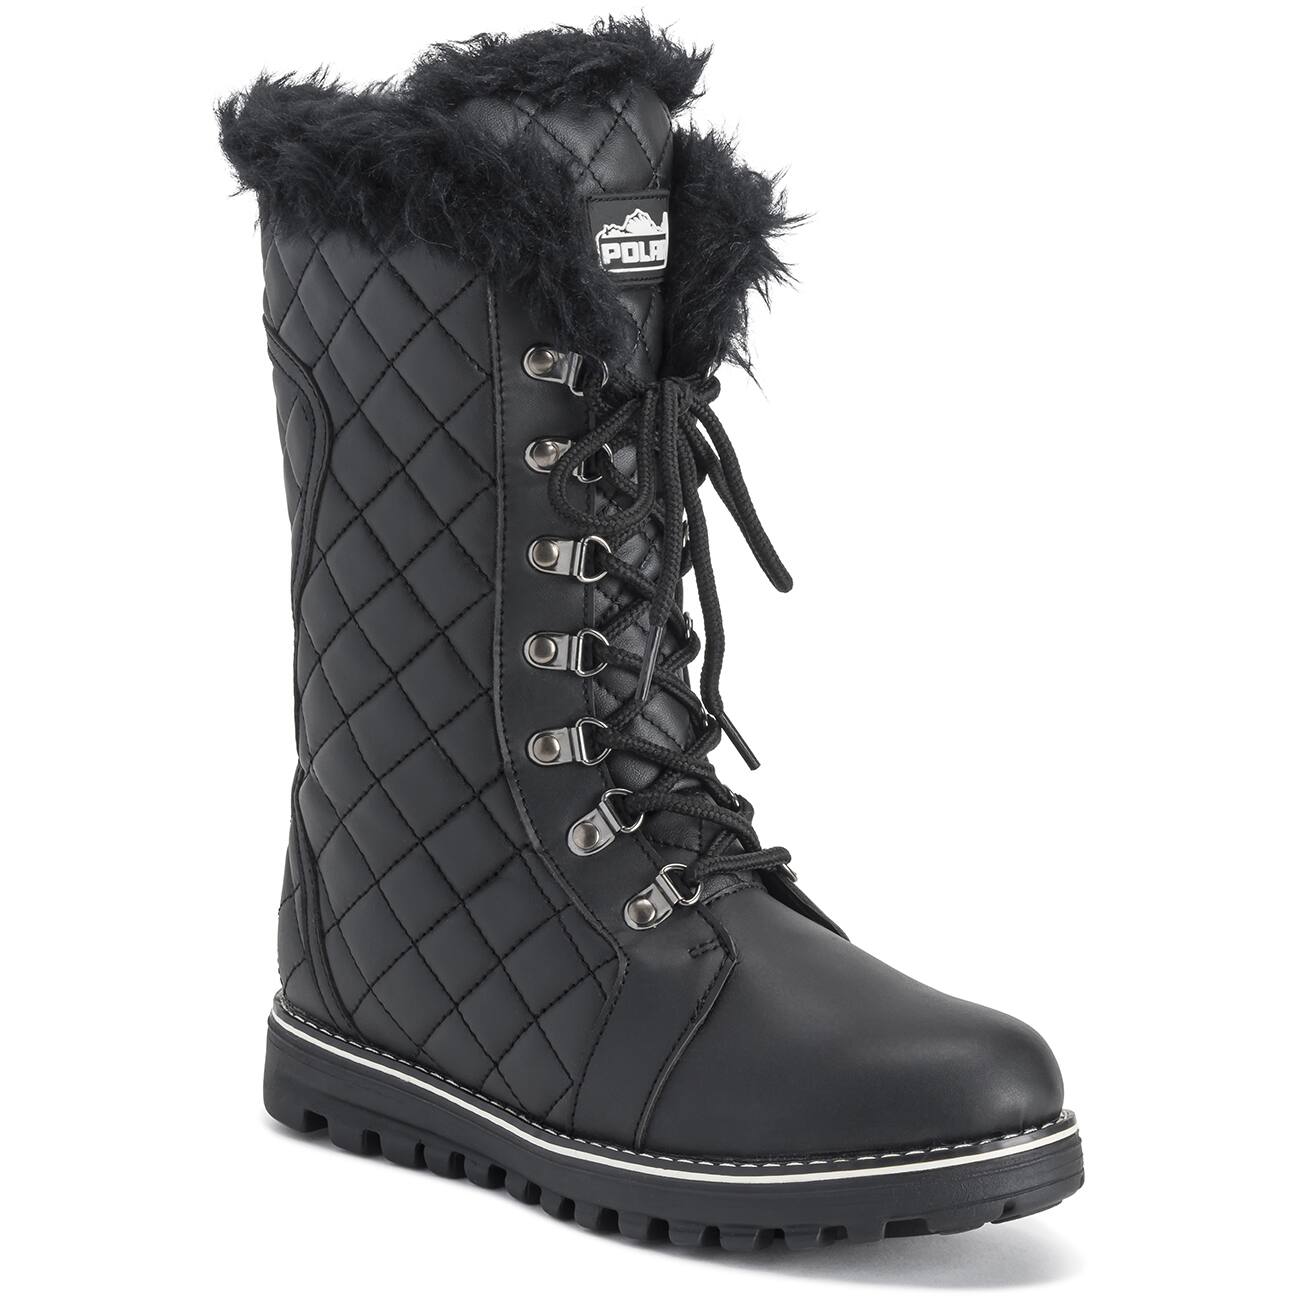 Polar Products Women's Quilted Winter Knee High Boot - $33.75 + Free Shipping